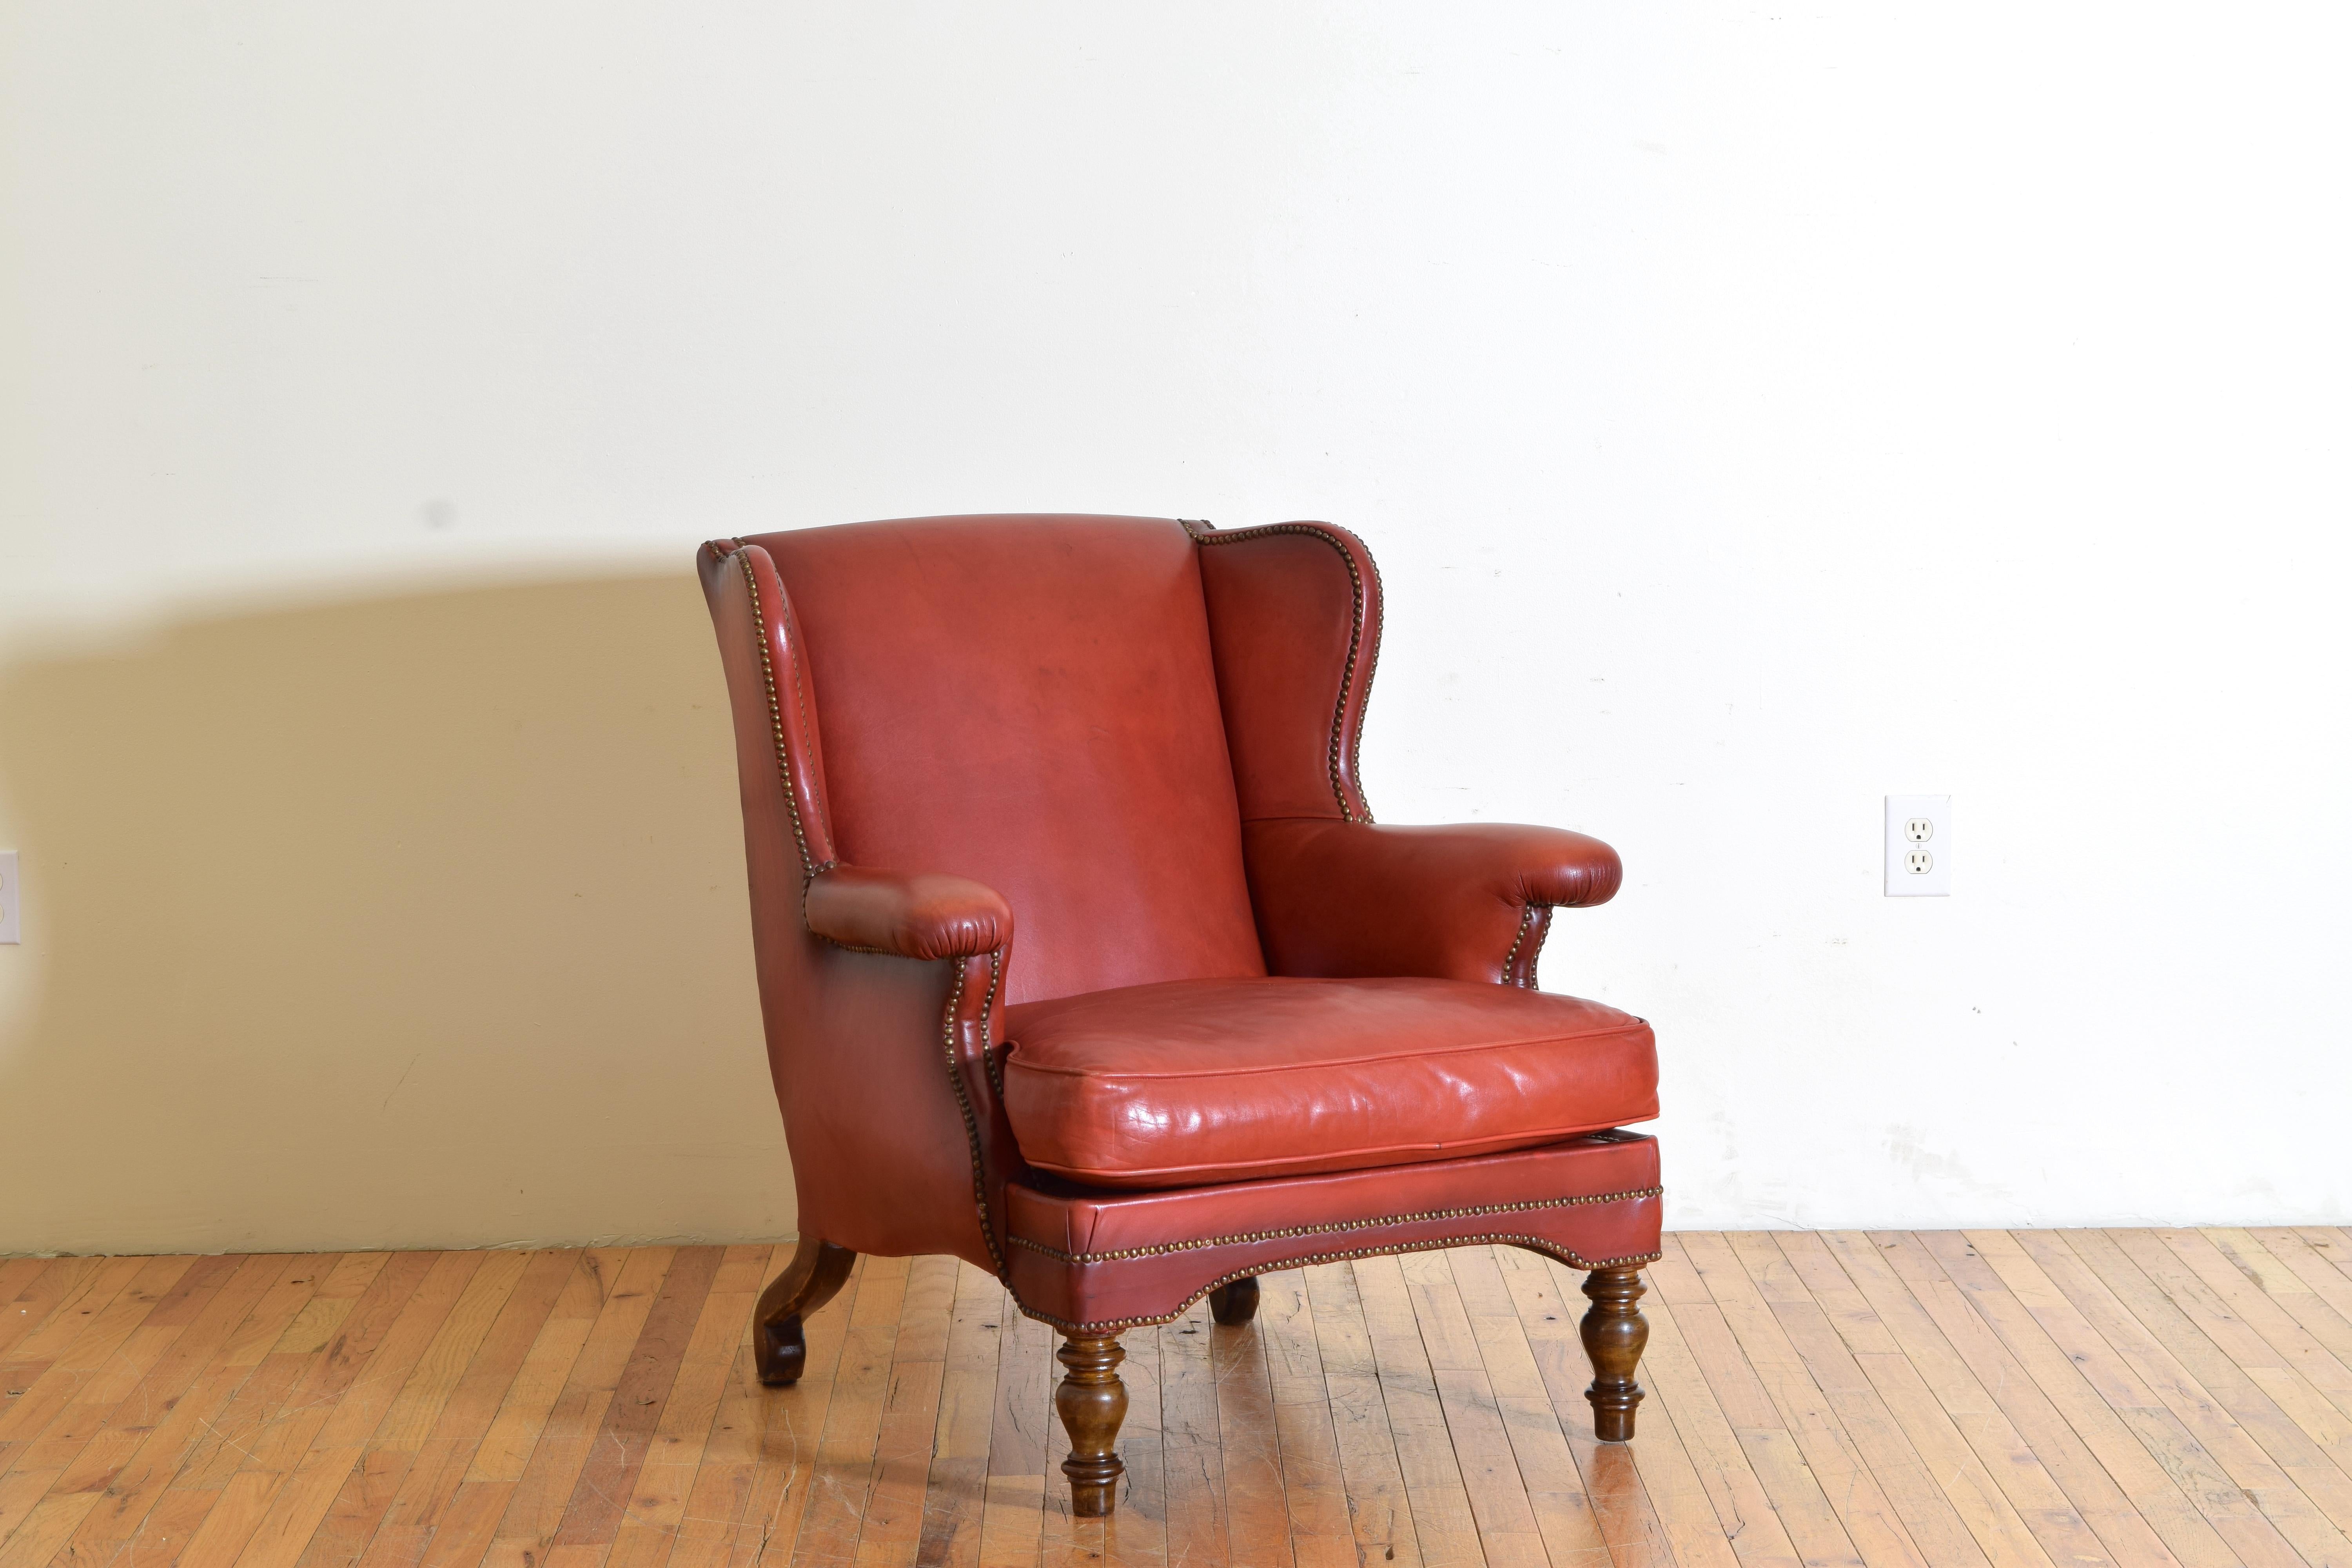 This deep set leather chair is completely covered in a faded red leather trimmed in patinated brass nailheads, the closed arms jutting forward slightly, with a loose cushion, raised on turned front legs and wonderfully shaped extended back legs